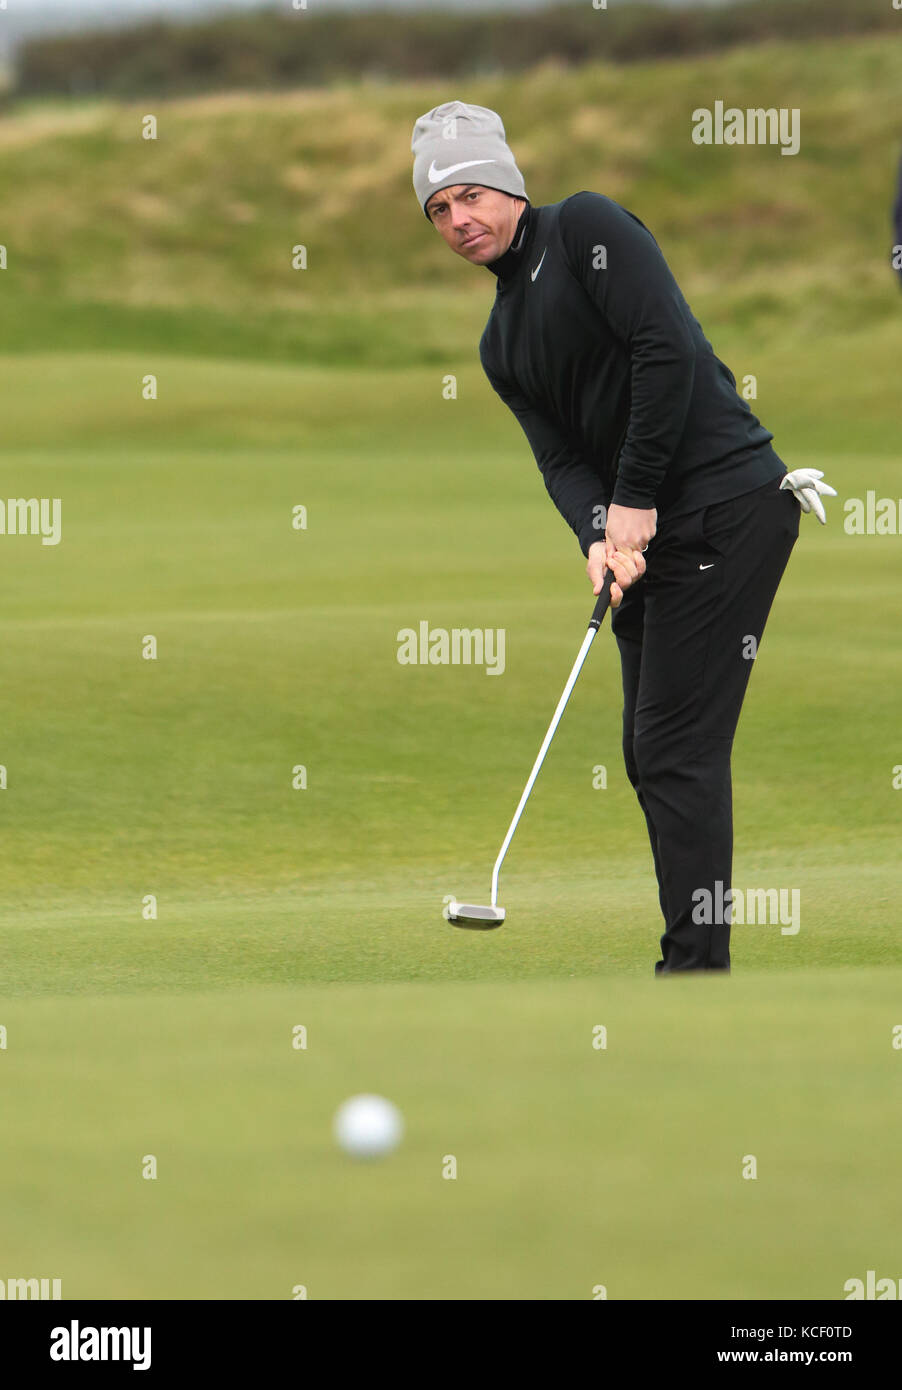 St Andrews, Fife, Scotland, UK. 4th October, 2017. The Alfred Dunhill Links Golf Championship. Rory McIlroy, plays a pratice round at The Alfred dunhill Cup, St Andrews fife Scotland, uk Wednesday 4th of October 2017 Credit: Derek Allan/Alamy Live News Stock Photo